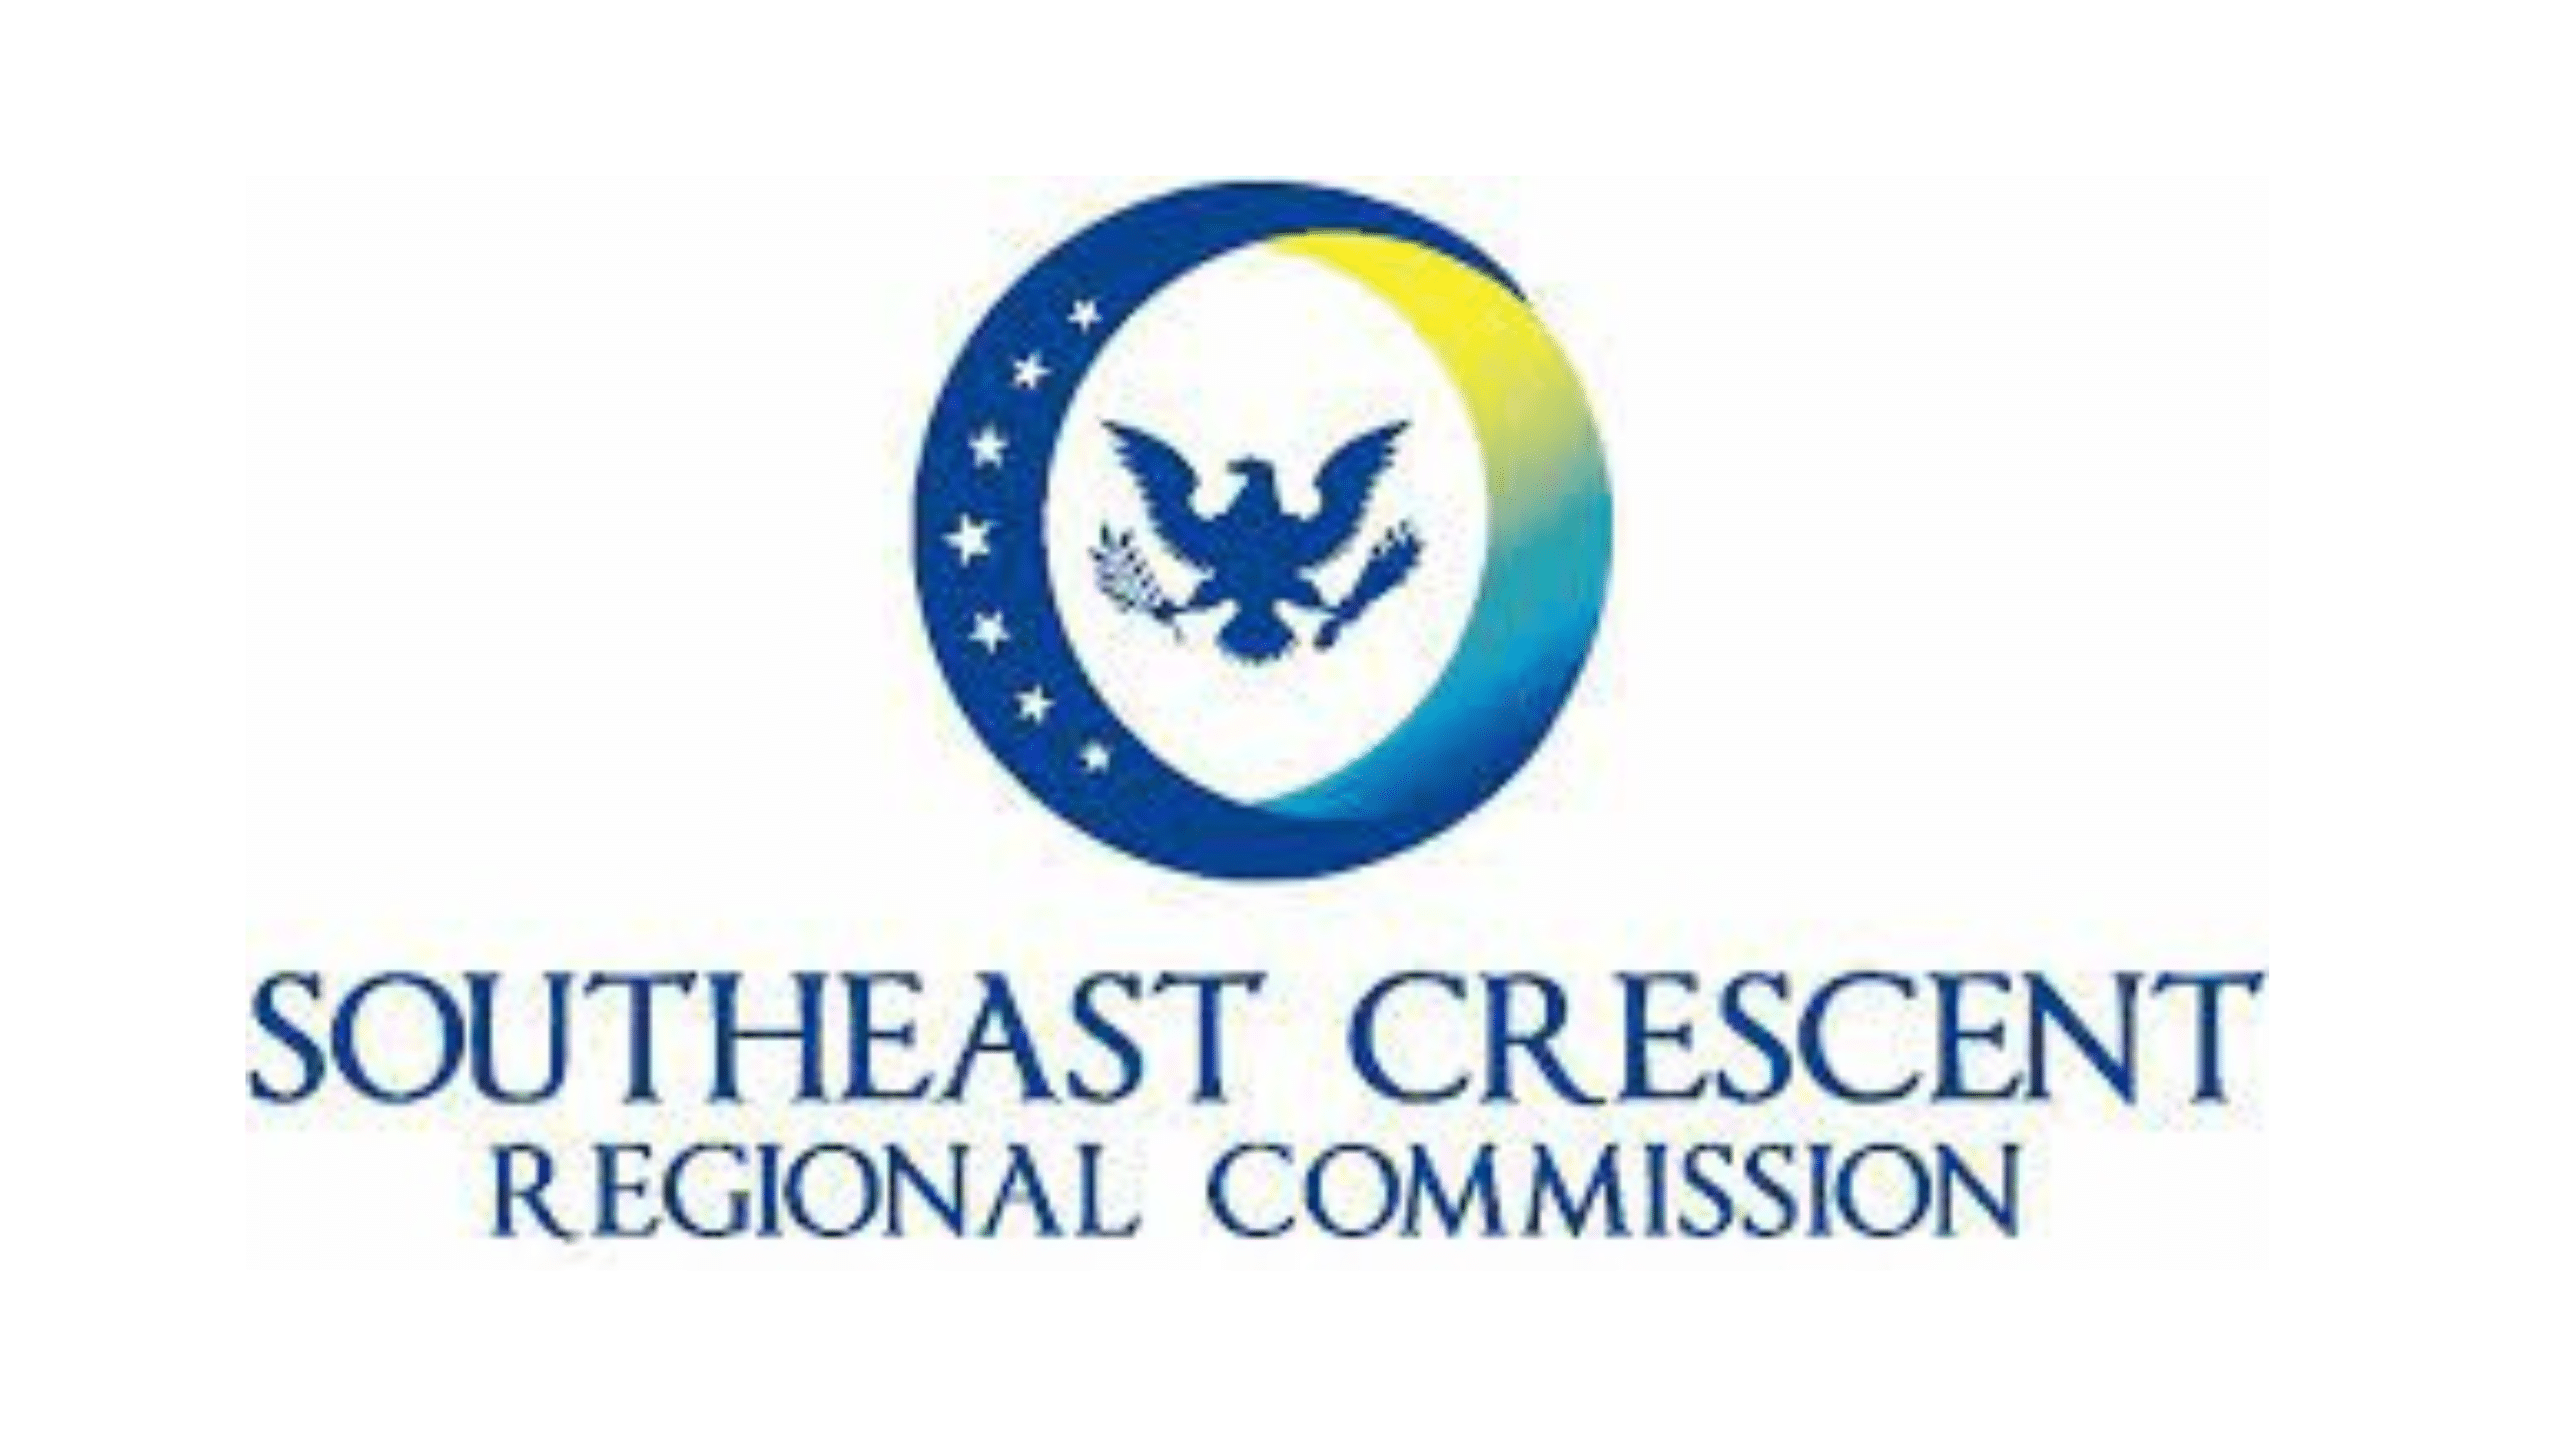 Southeast Crescent Regional Commission (SCRC) announces first round of funding for 69 North Carolina counties